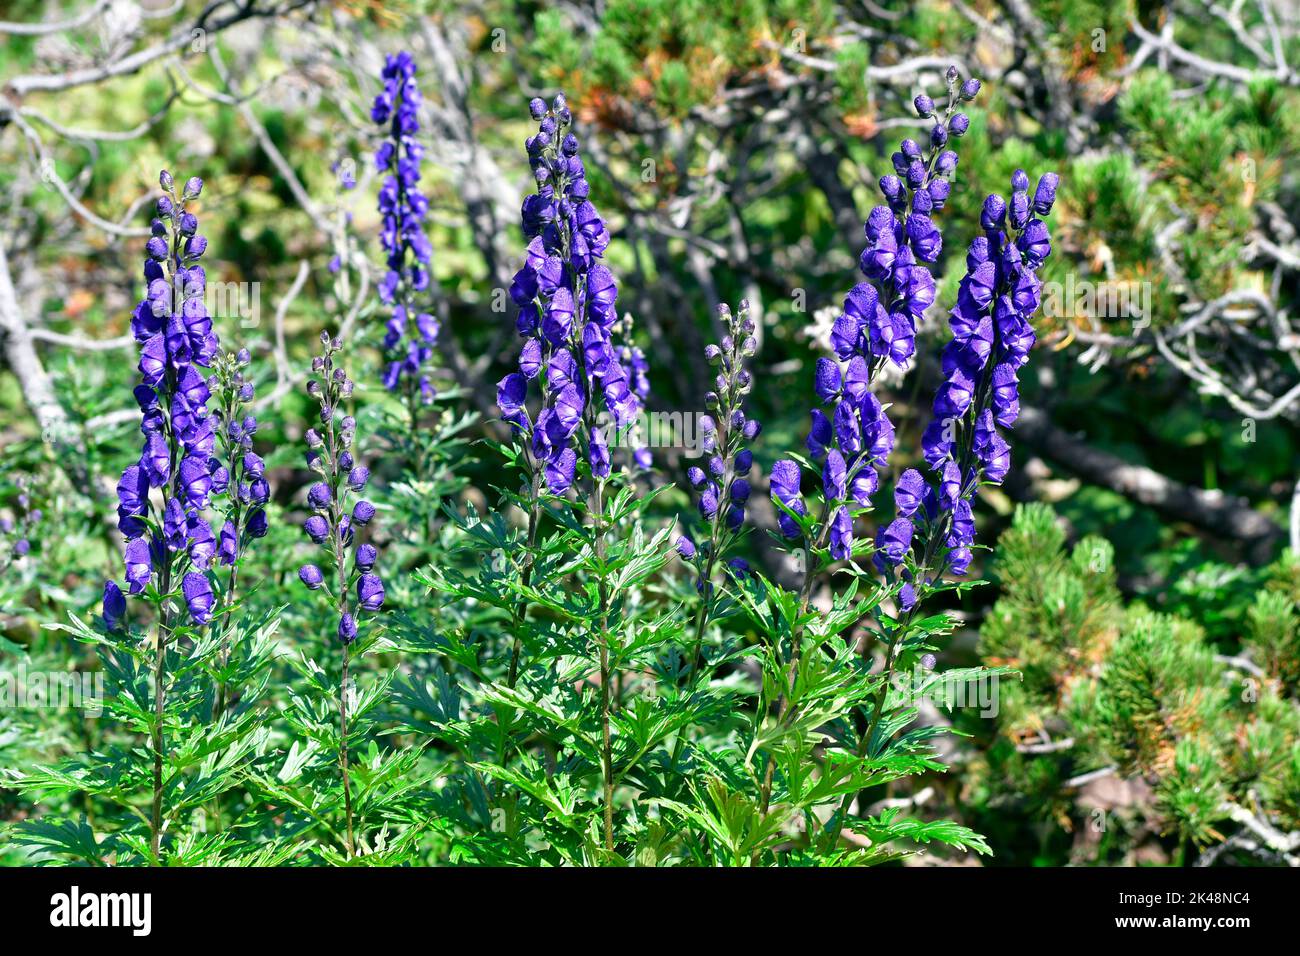 monkshood - Aconitum napellus - is one of the most poisonous plants in Europe, but is also used as an ornamental plant and in medicine Stock Photo